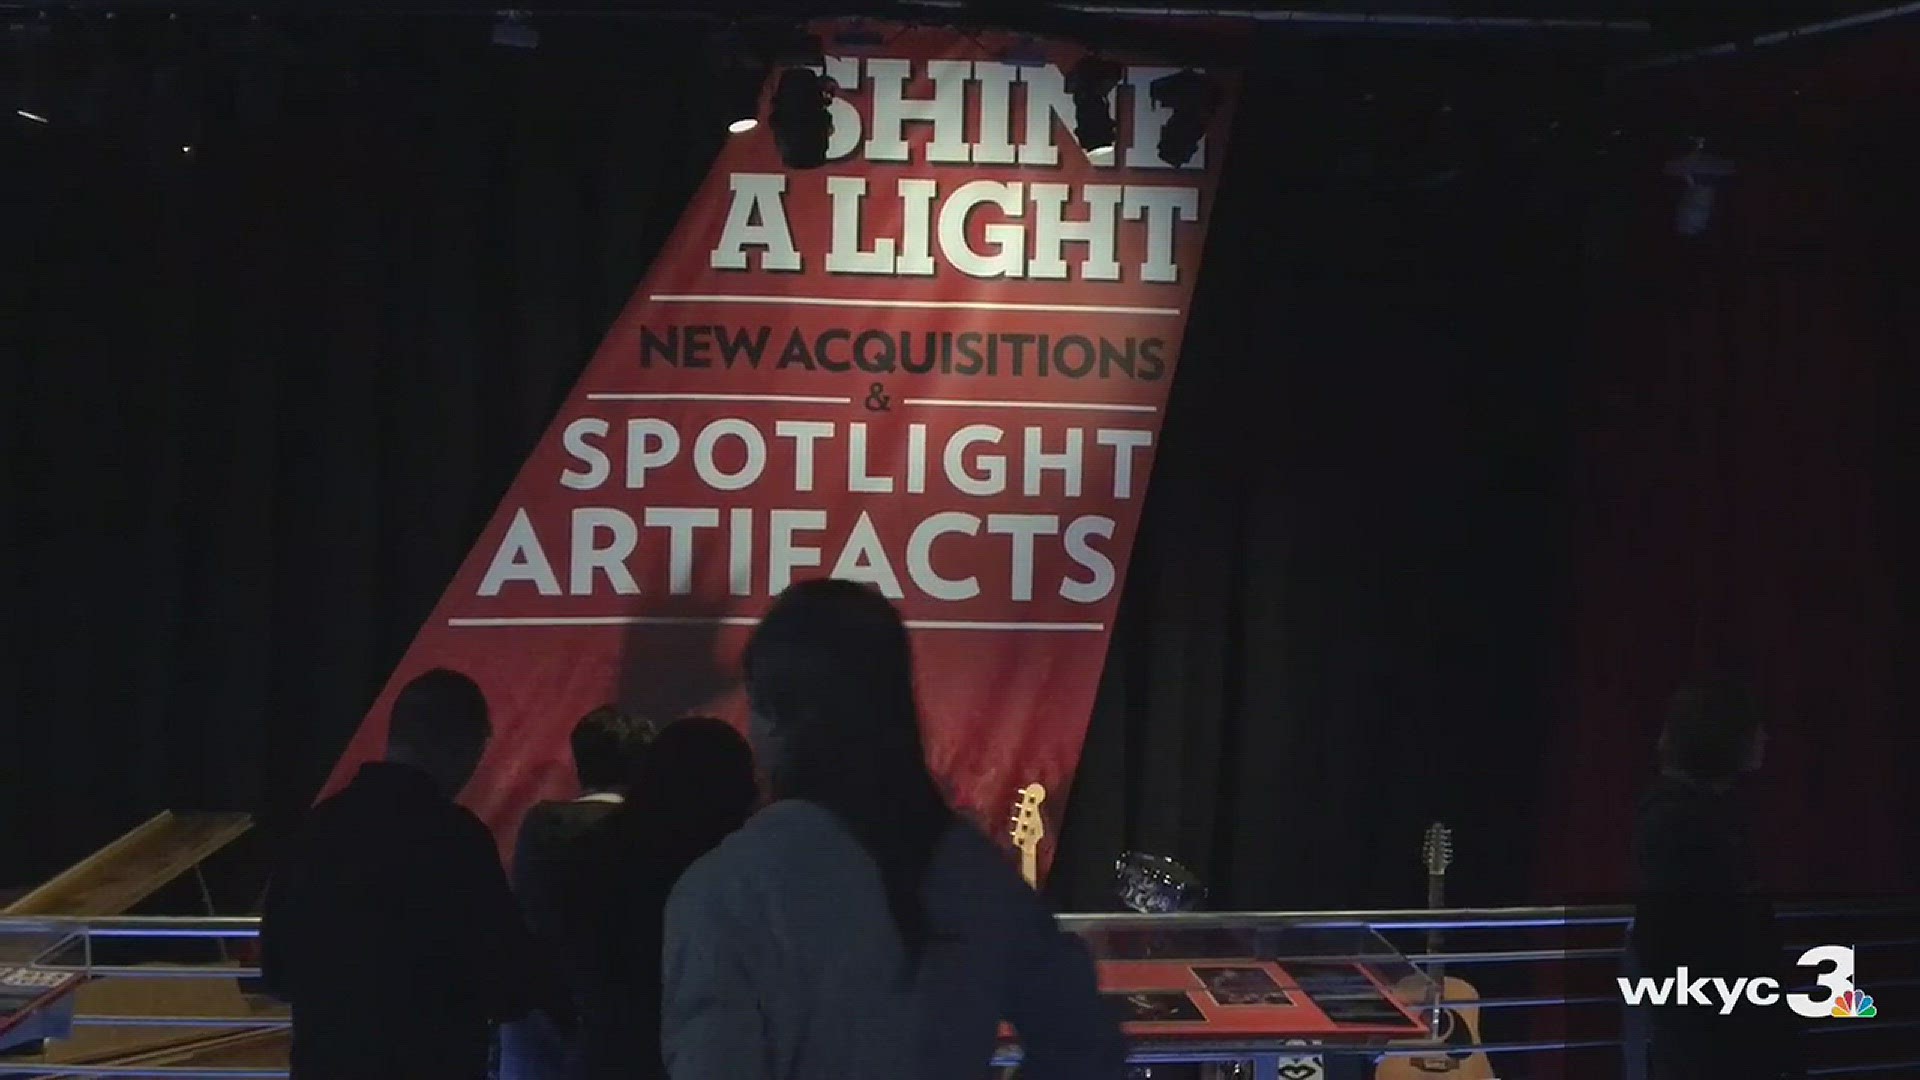 March 16, 2018: WKYC was given a first look inside the newest exhibit at the Rock and Roll Hall of Fame. 'Shine a Light: New Acquisitions and Spotlight Artifacts' opened to the public Friday. The space, which will be updated frequently, is used to showcase the Rock Hall's newest acquisitions.